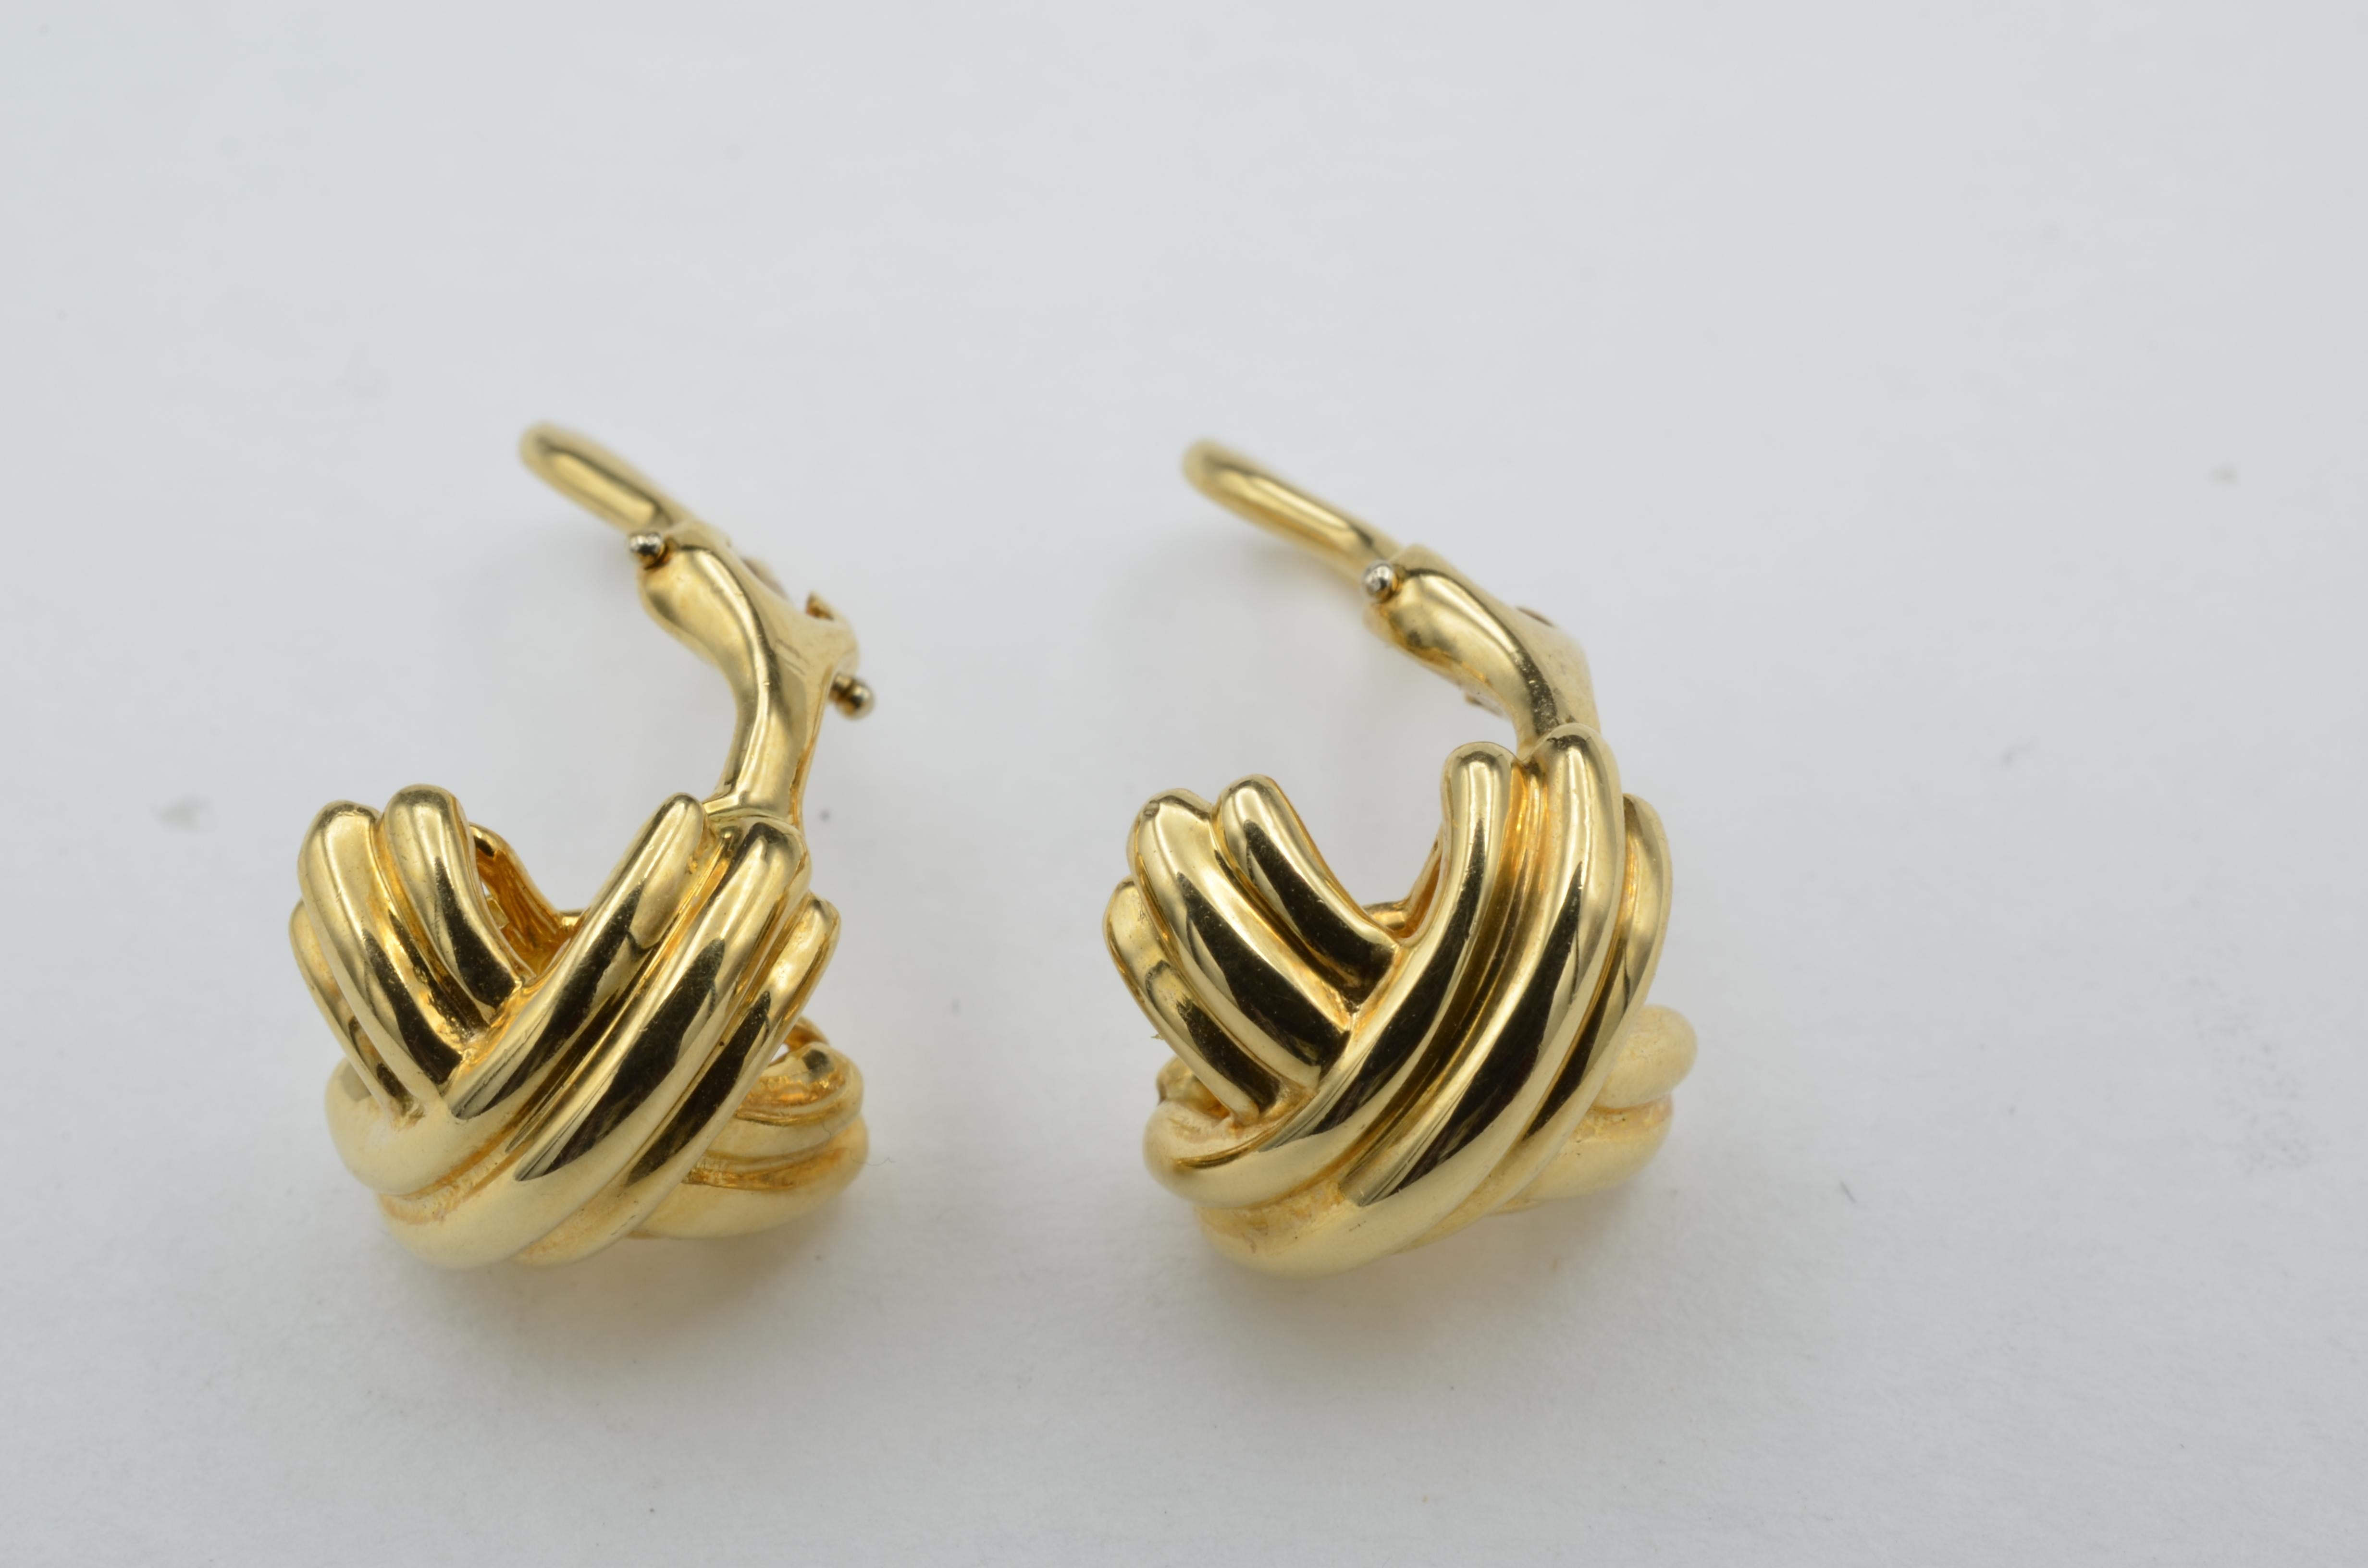 Tiffany & Co. 18 Karat Yellow Gold Clip Earring by Paloma Picasso In Excellent Condition For Sale In Berkeley, CA